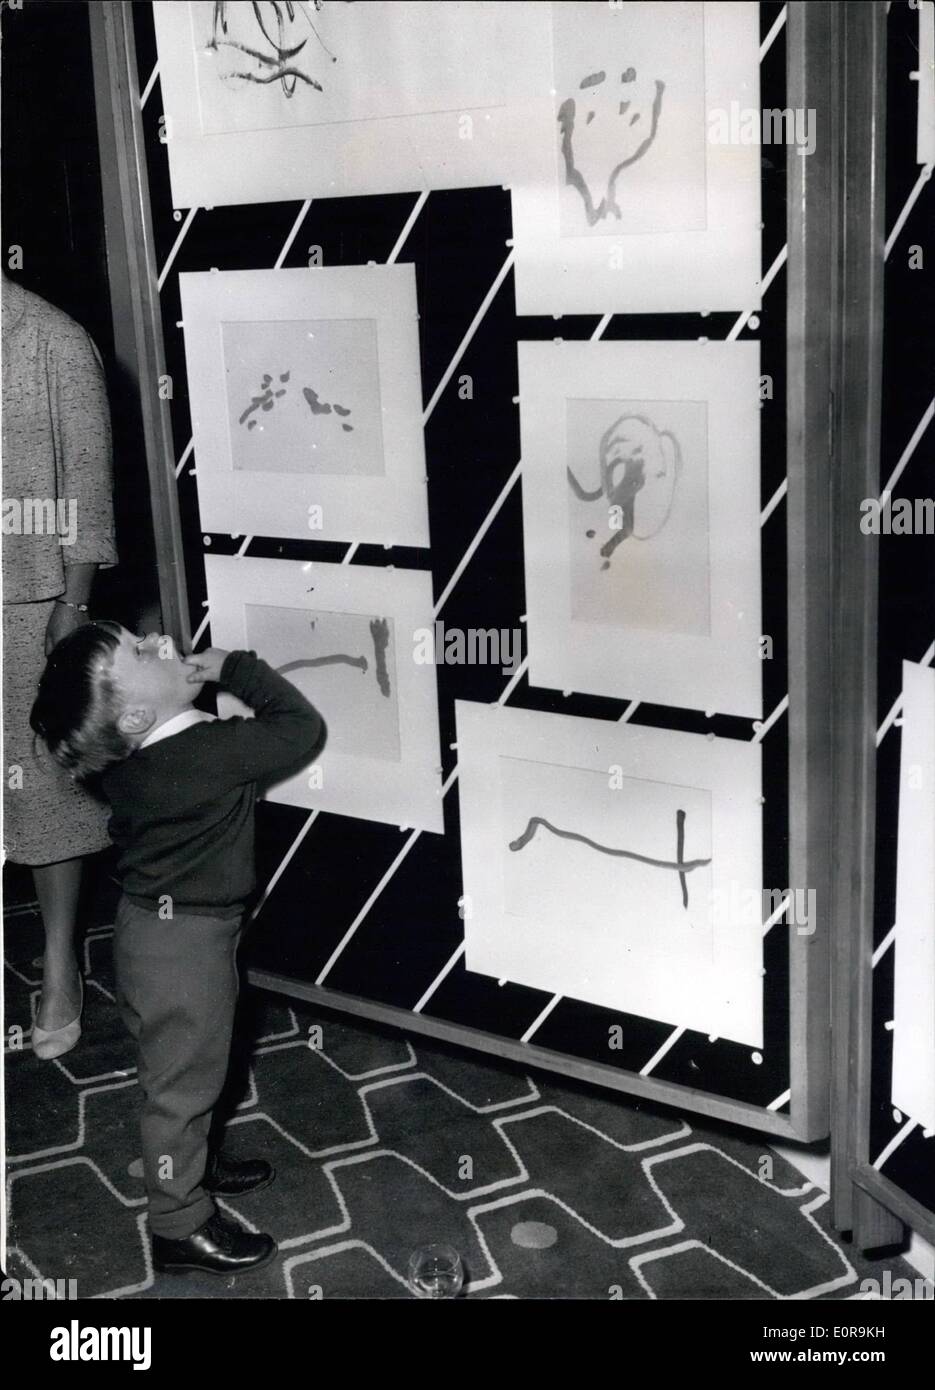 https://c8.alamy.com/comp/E0R9KH/sep-09-1958-exhibition-of-painting-by-children-adults-and-chimpansees-E0R9KH.jpg